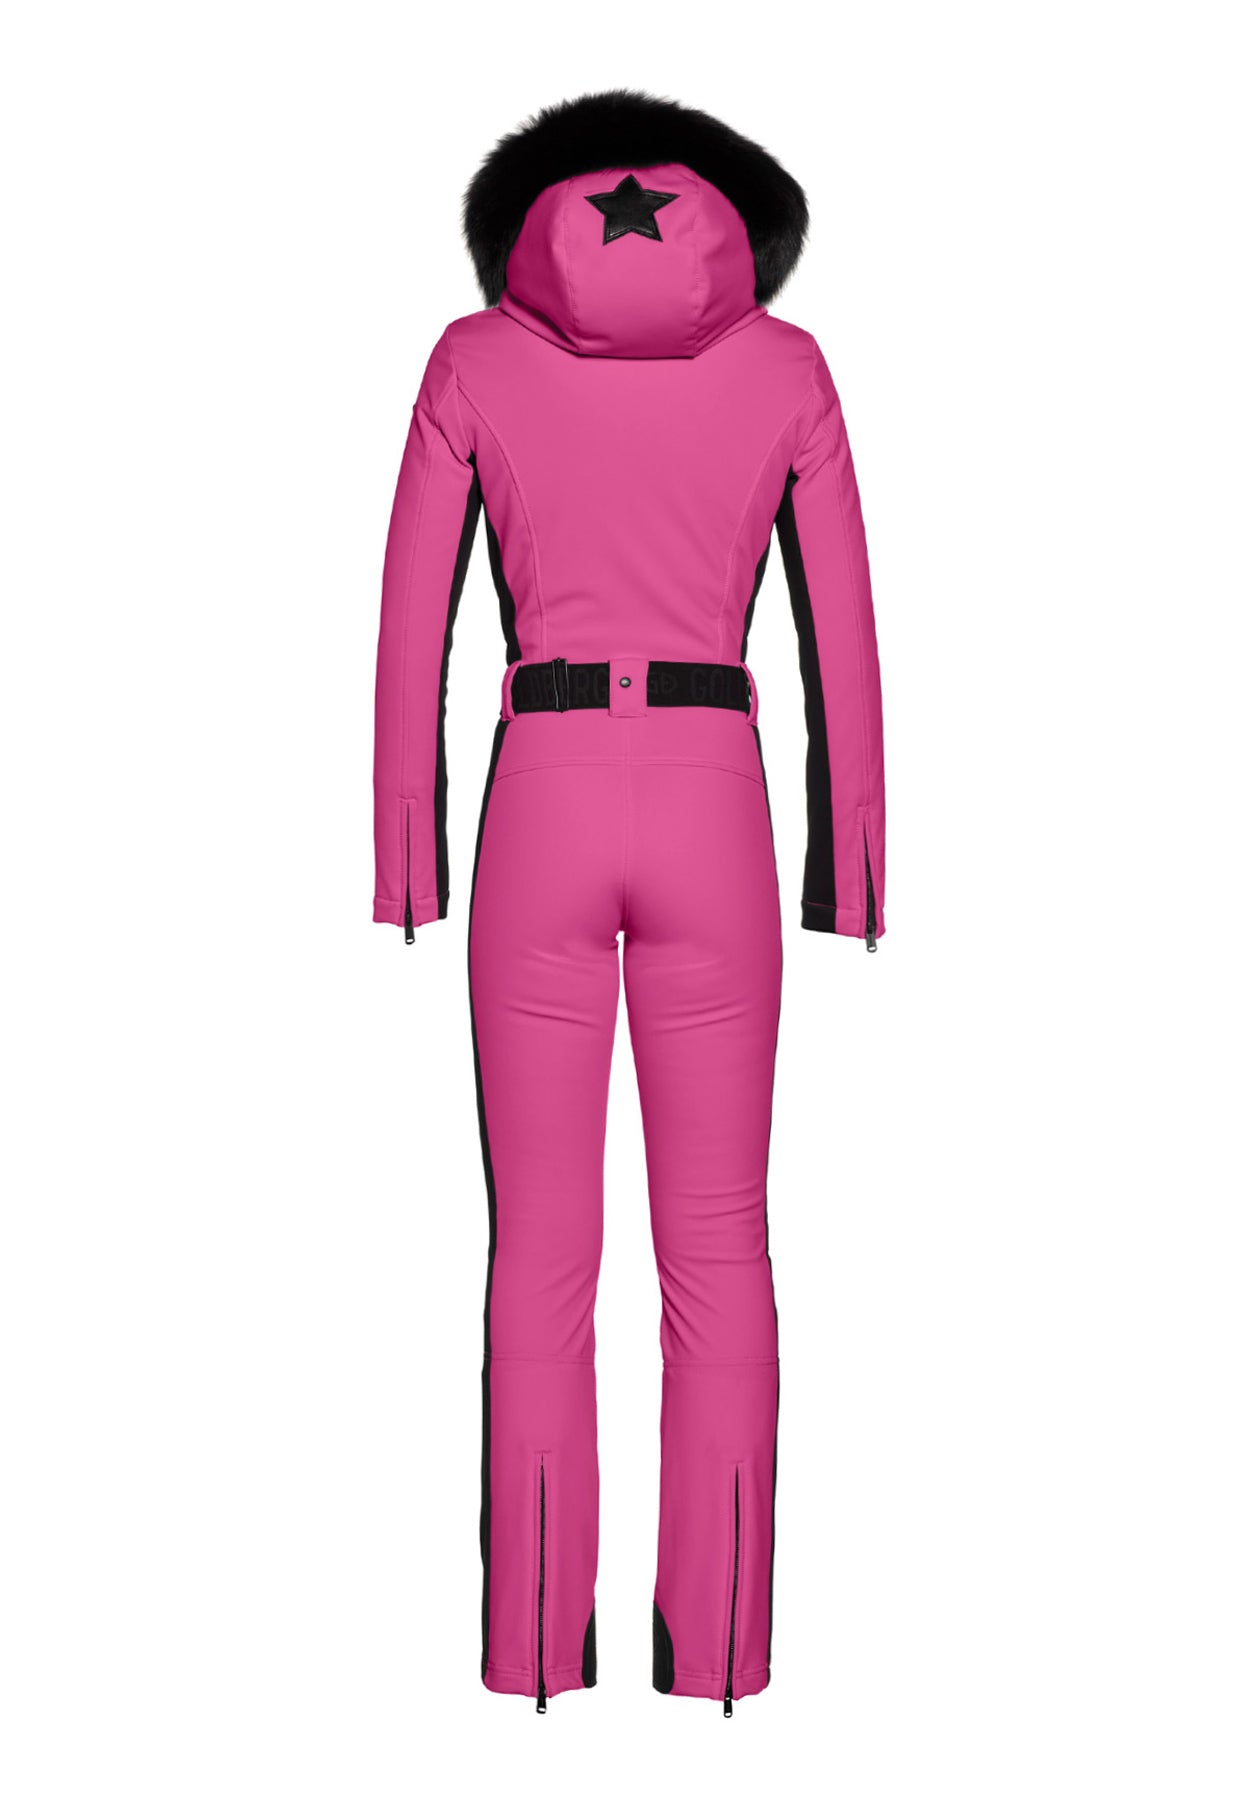 Goldbergh Parry One Piece Ski Suit in Pink with Real Fur Hood